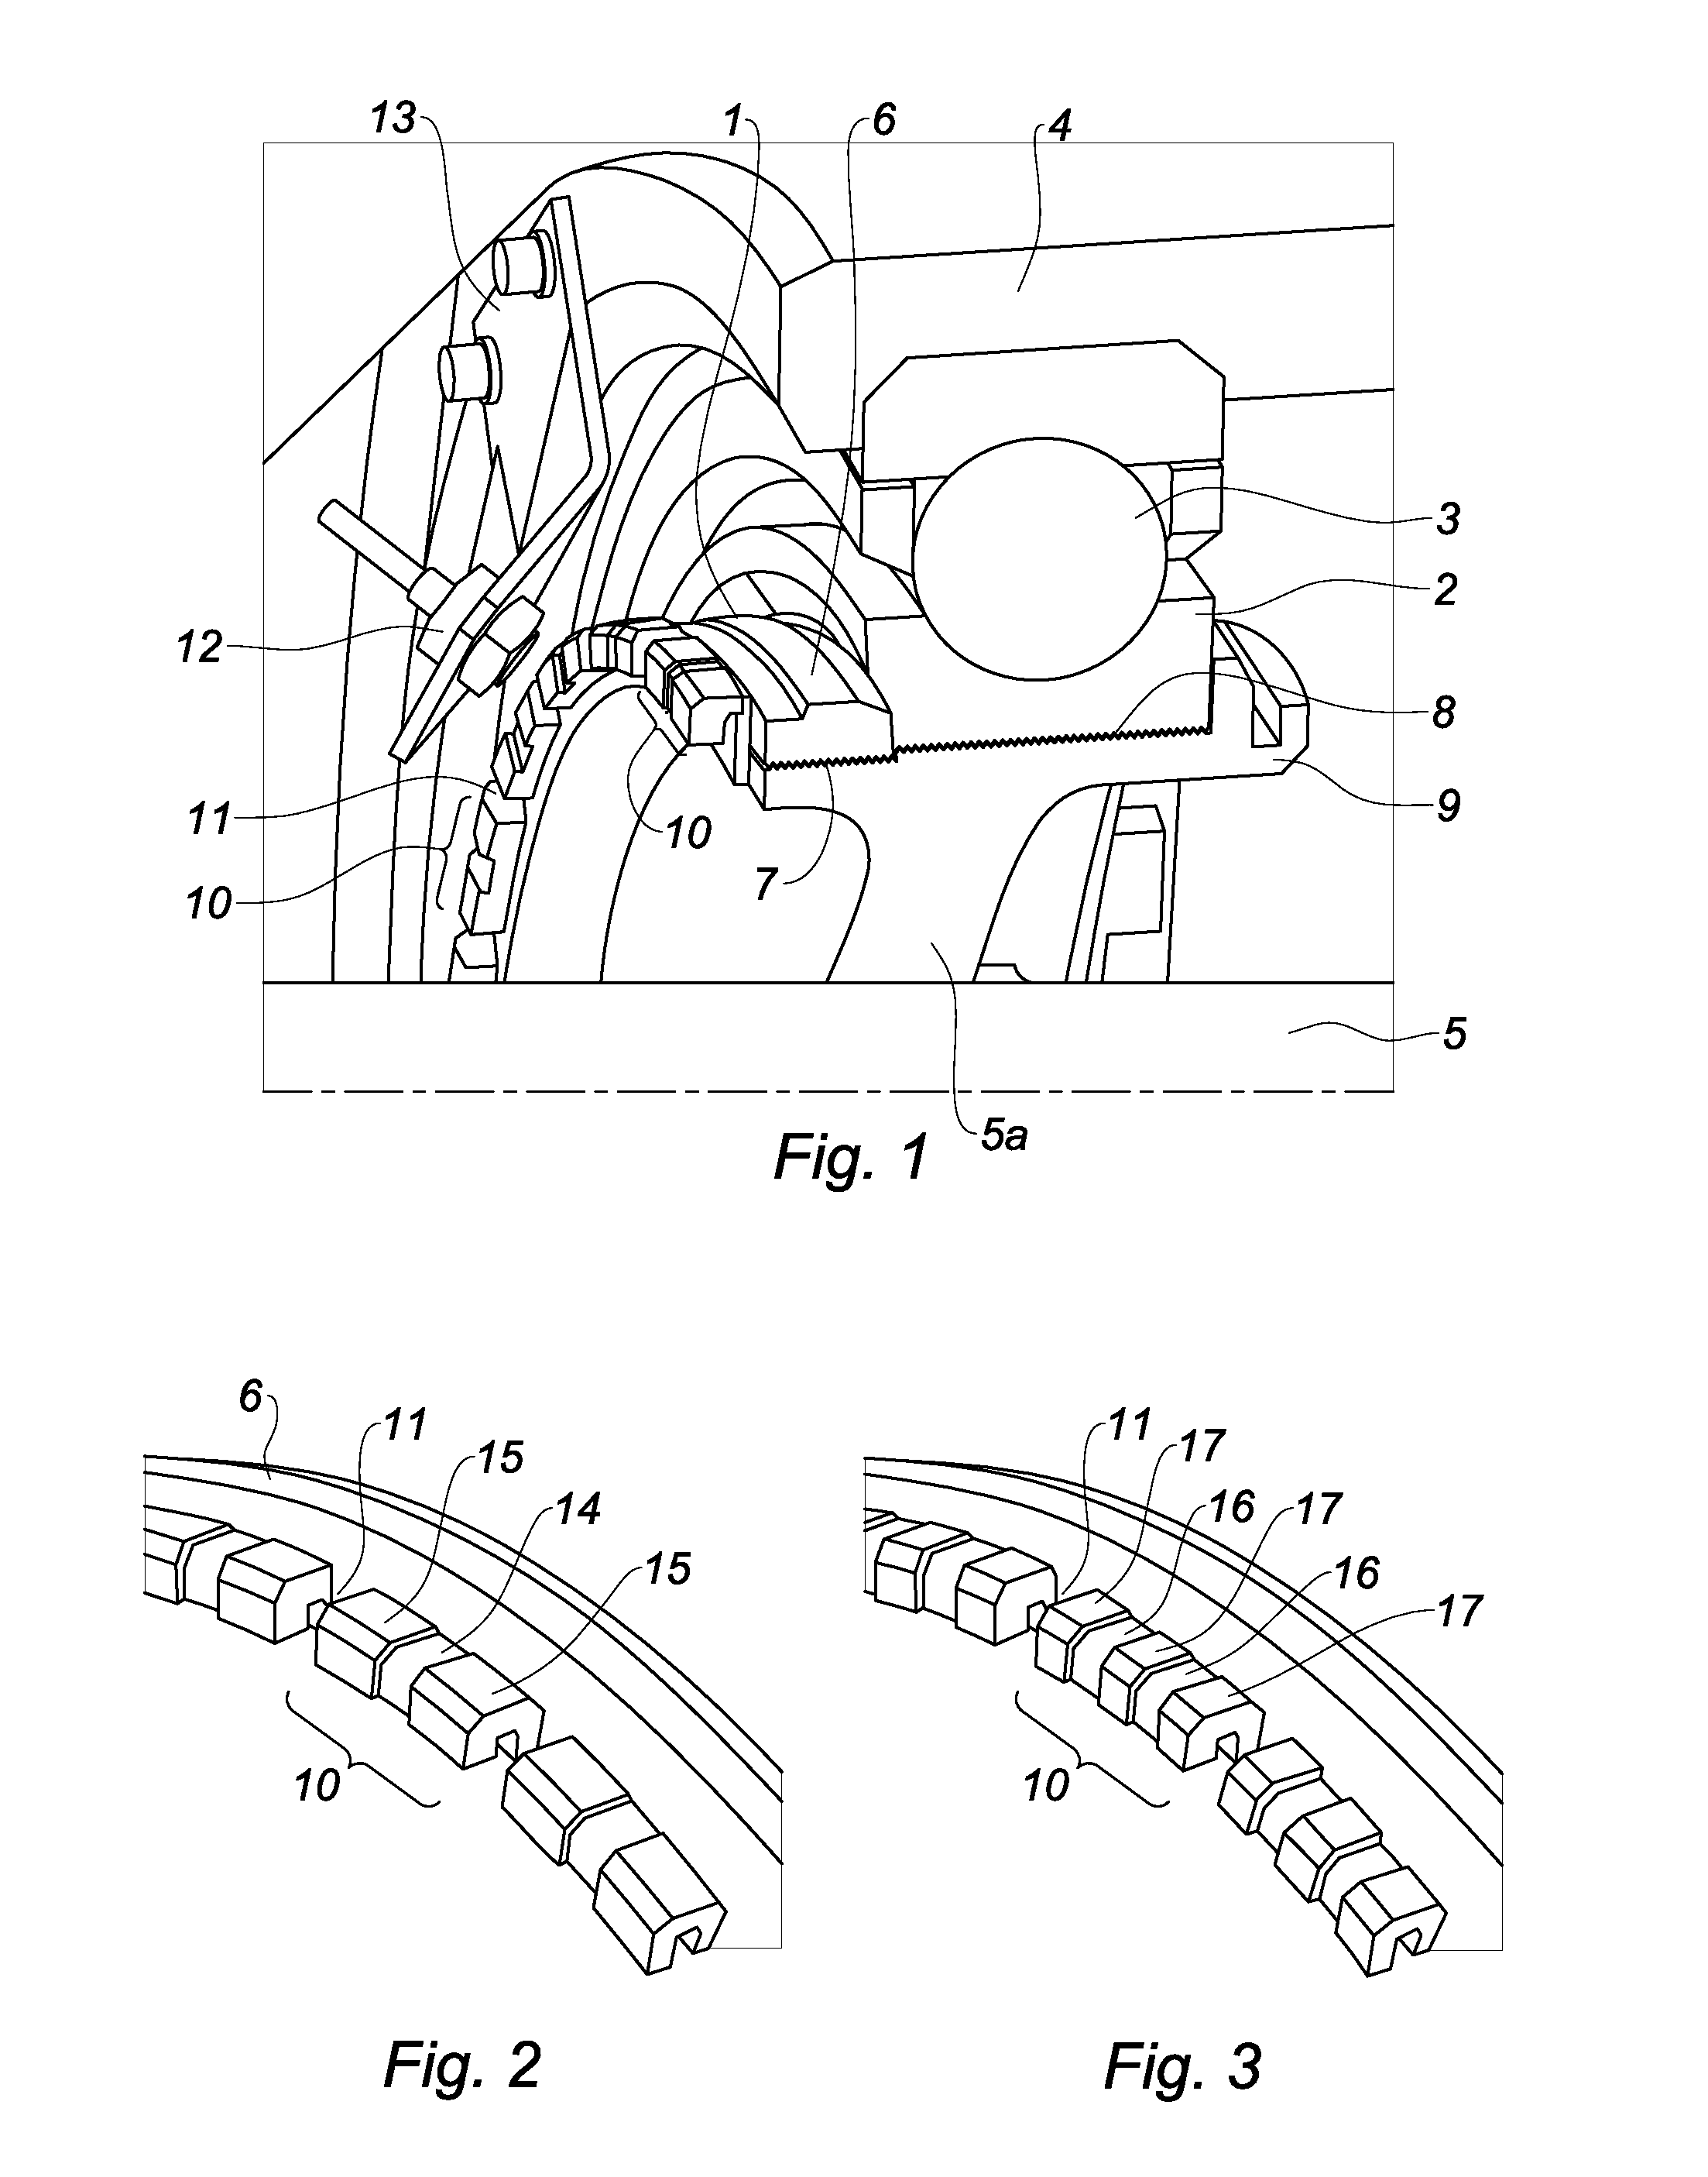 Bearing nut for measuring the rotational speed of a shaft connected to a turbomachine and associated measuring device